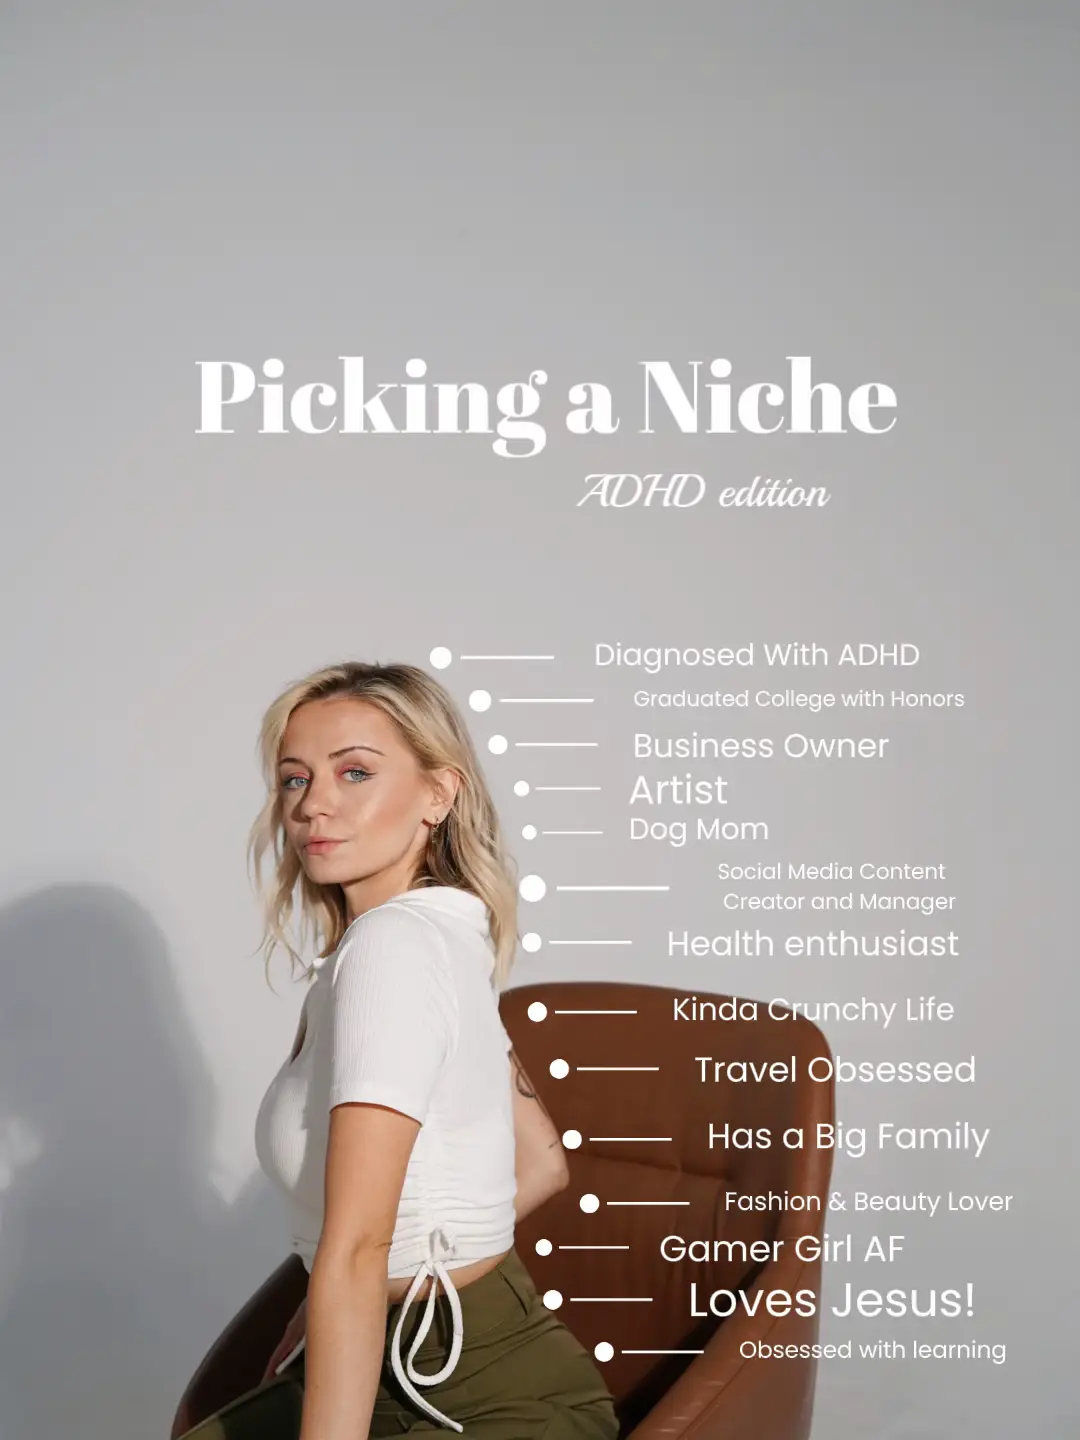 Picking a Niche's images